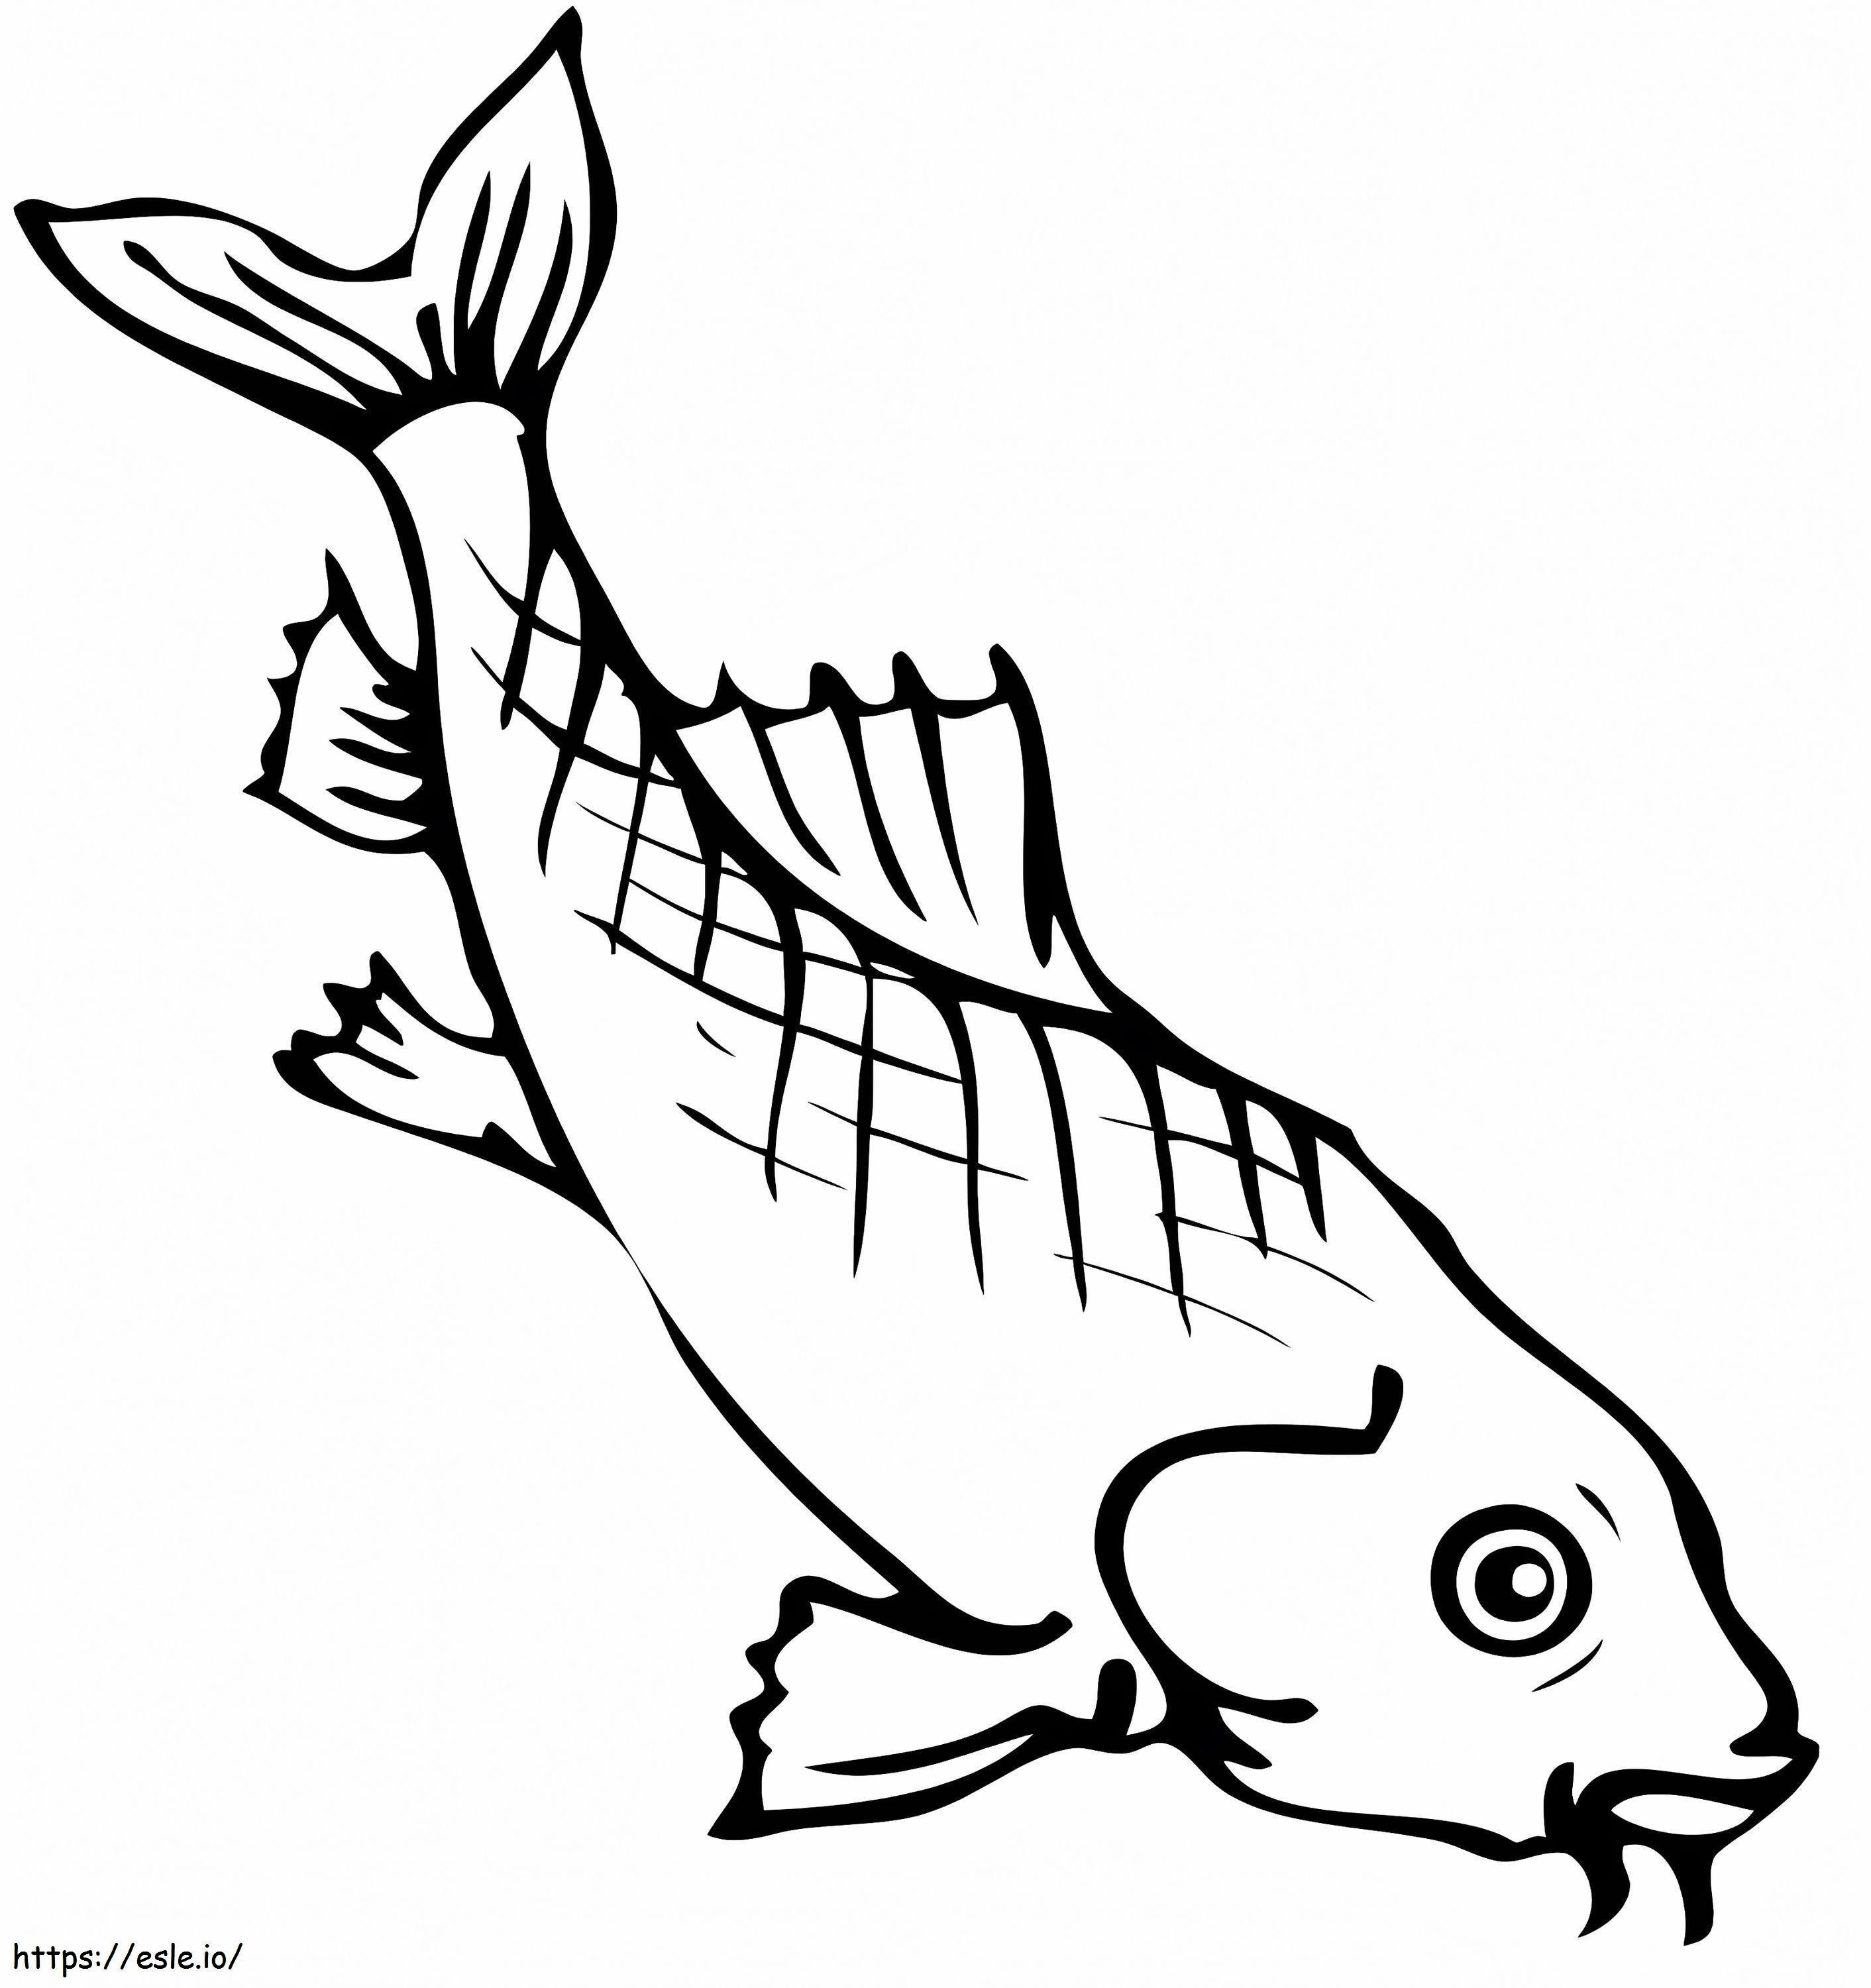 Freshwater Carp coloring page